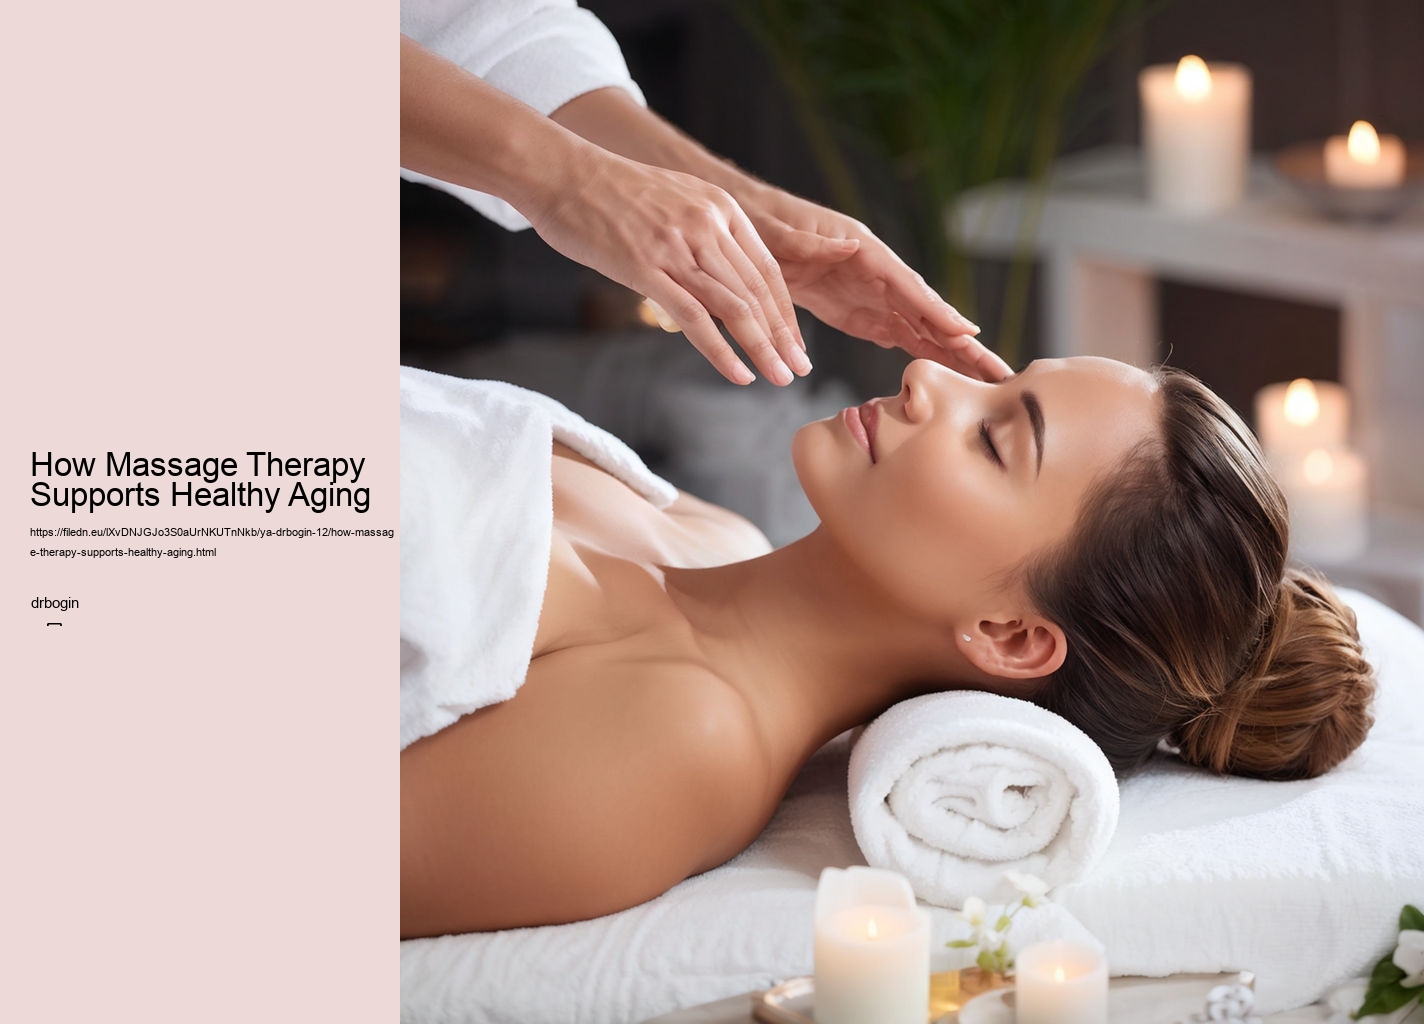 How Massage Therapy Supports Healthy Aging